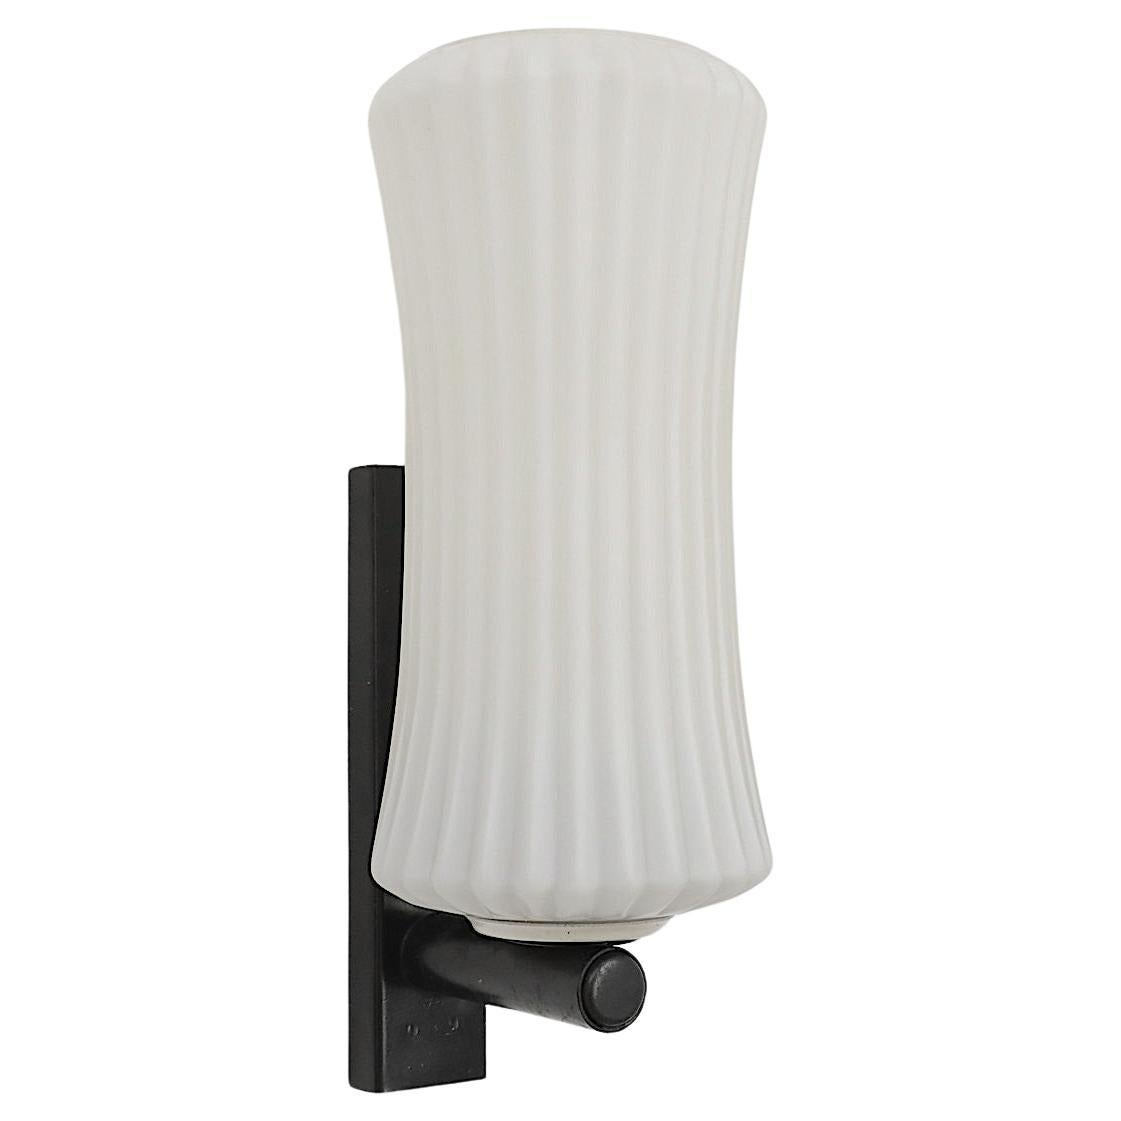 Philips Ribbed Milk glass wall lamp